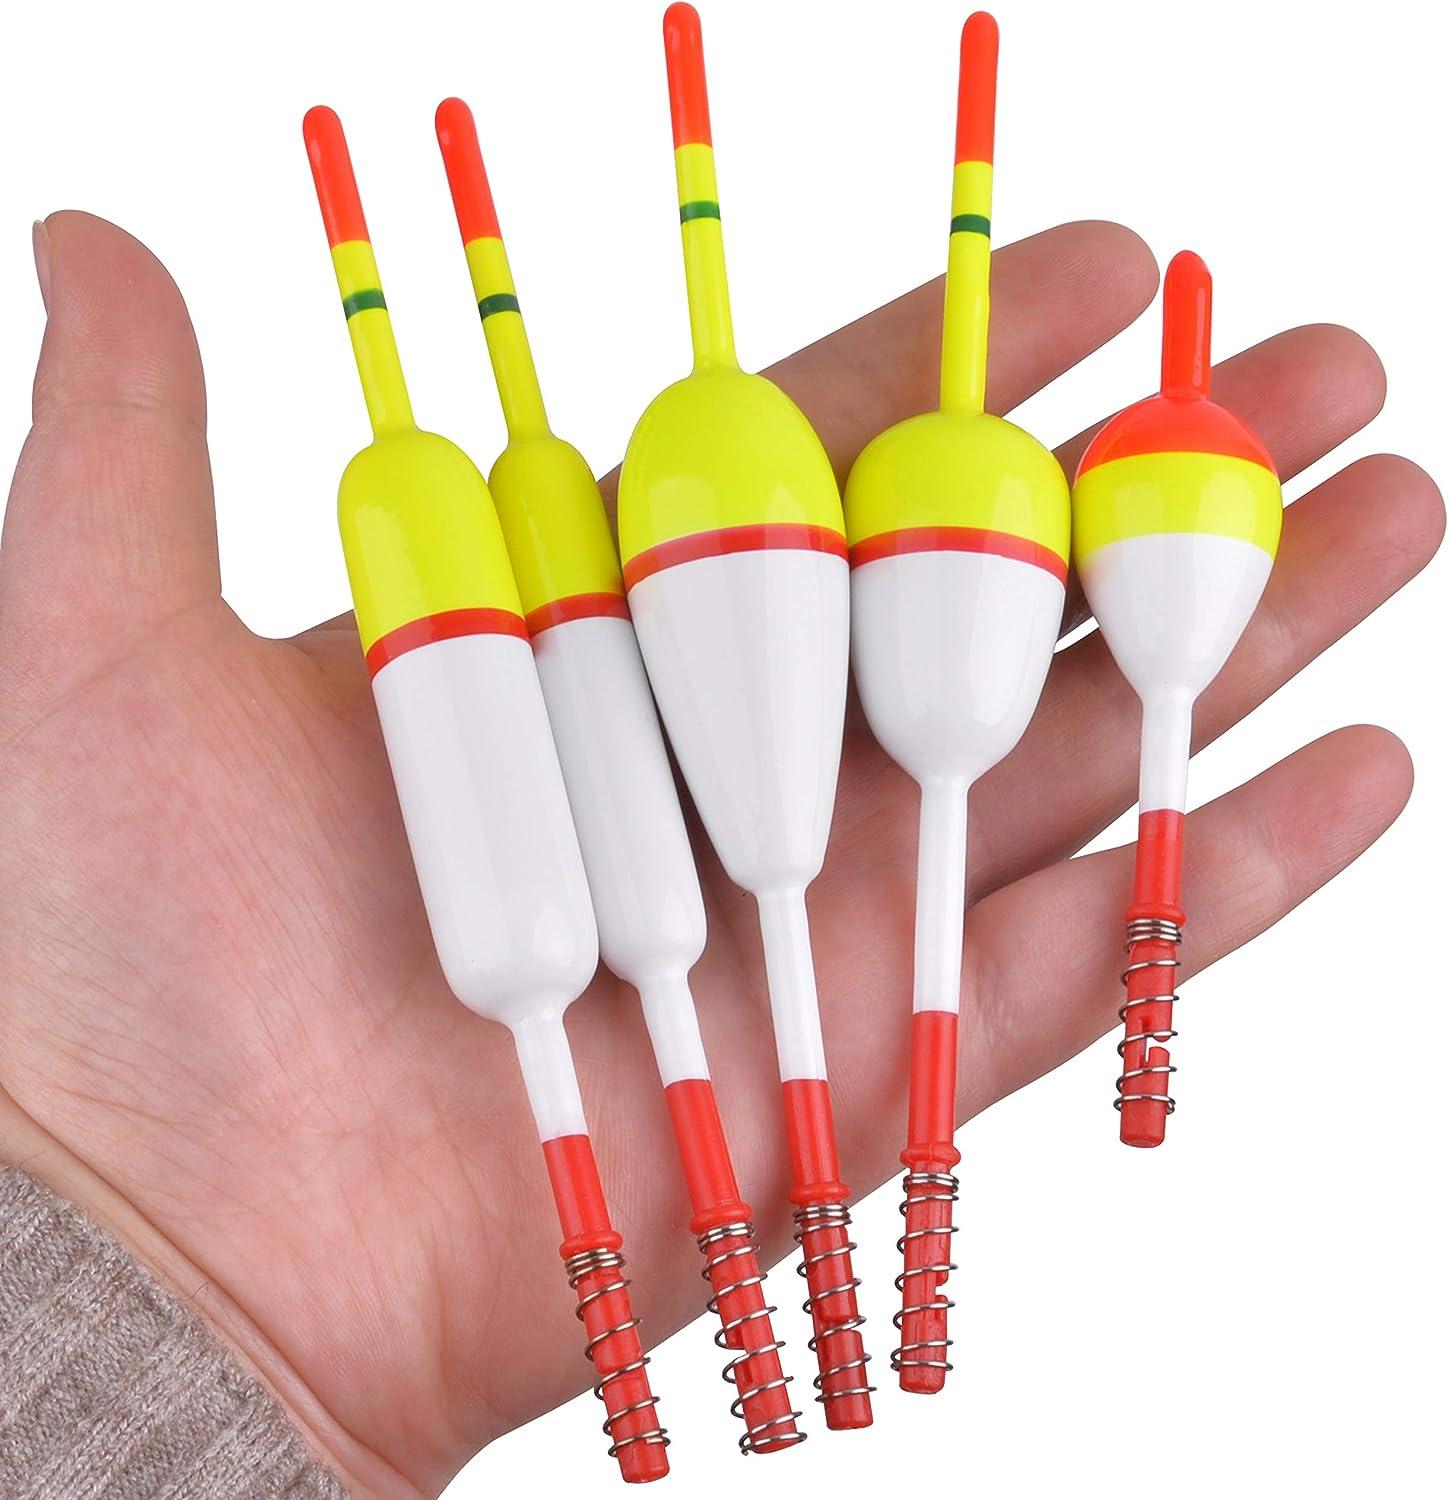 JOGFFDE 20PCS Fishing Floats and Bobbers Slip Bobbers for Fishing